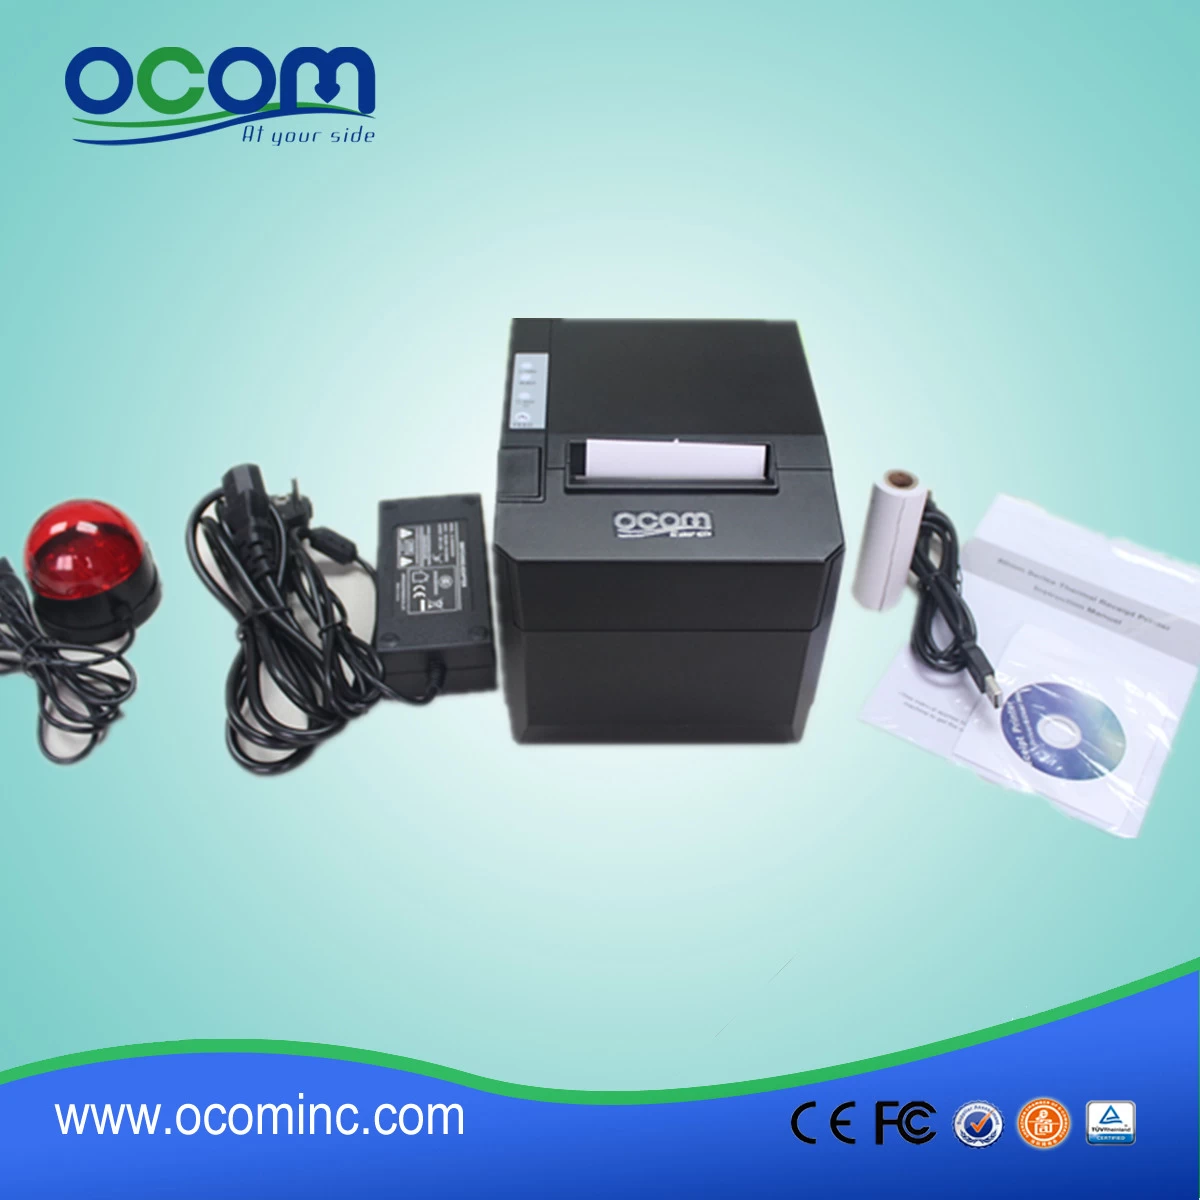 2015 newest 80mm wifi and bluetooth optional thermal receipt printer-OCPP-88A